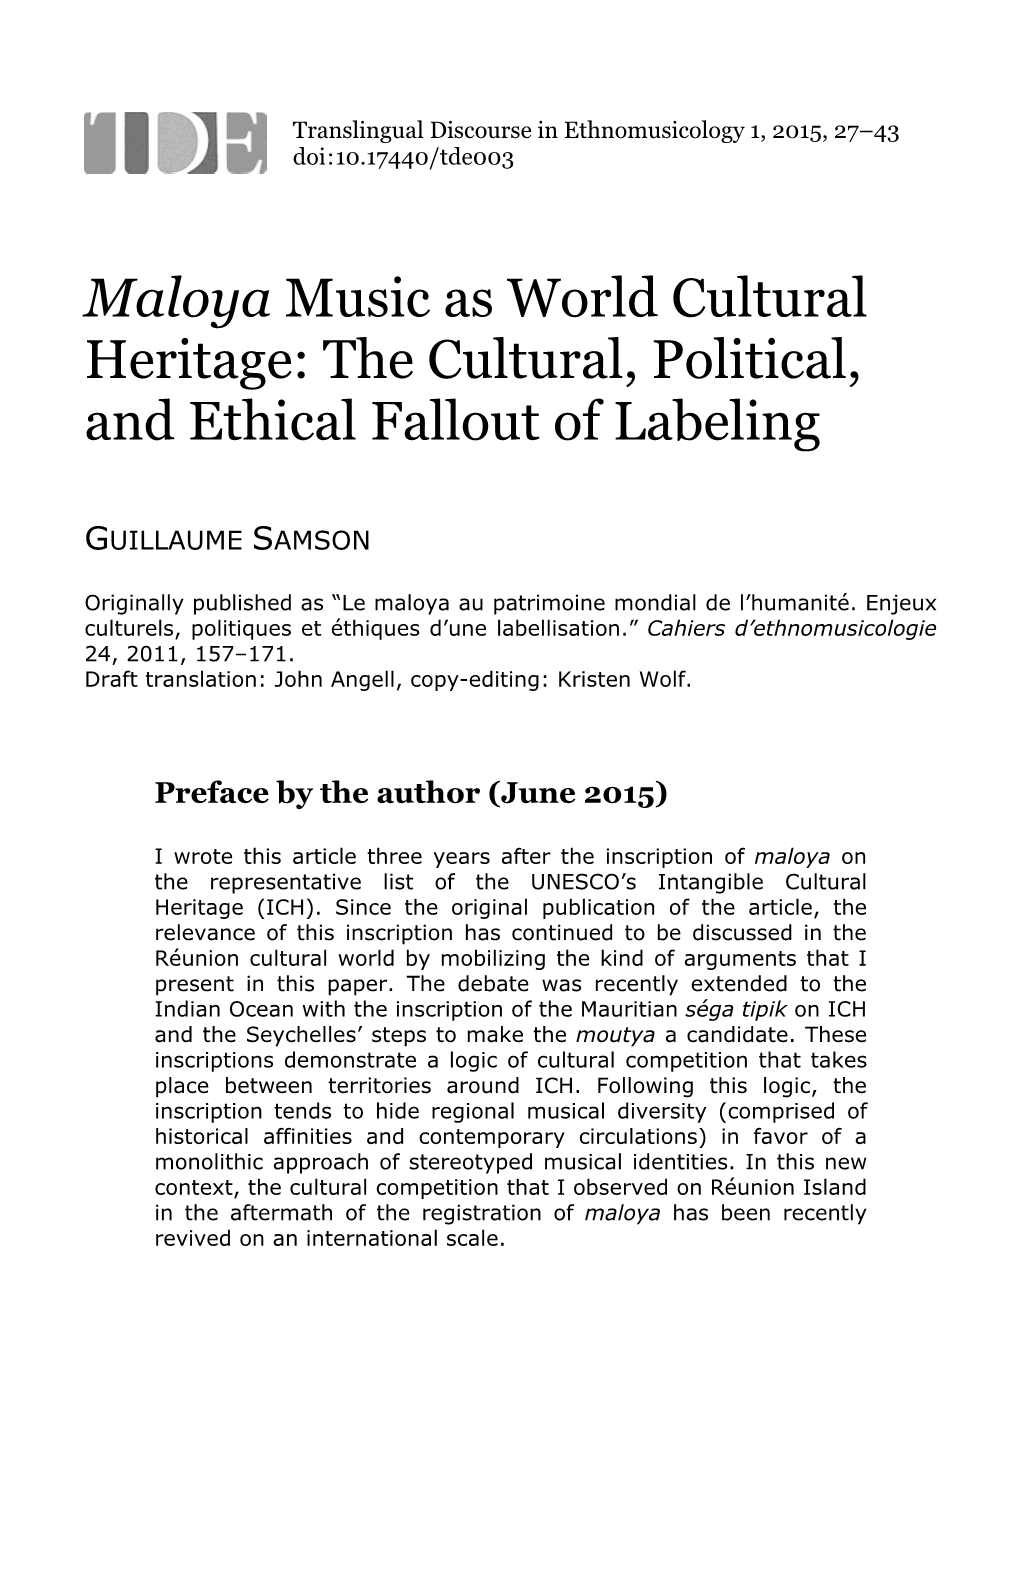 Maloya Music As World Cultural Heritage: the Cultural, Political, and Ethical Fallout of Labeling